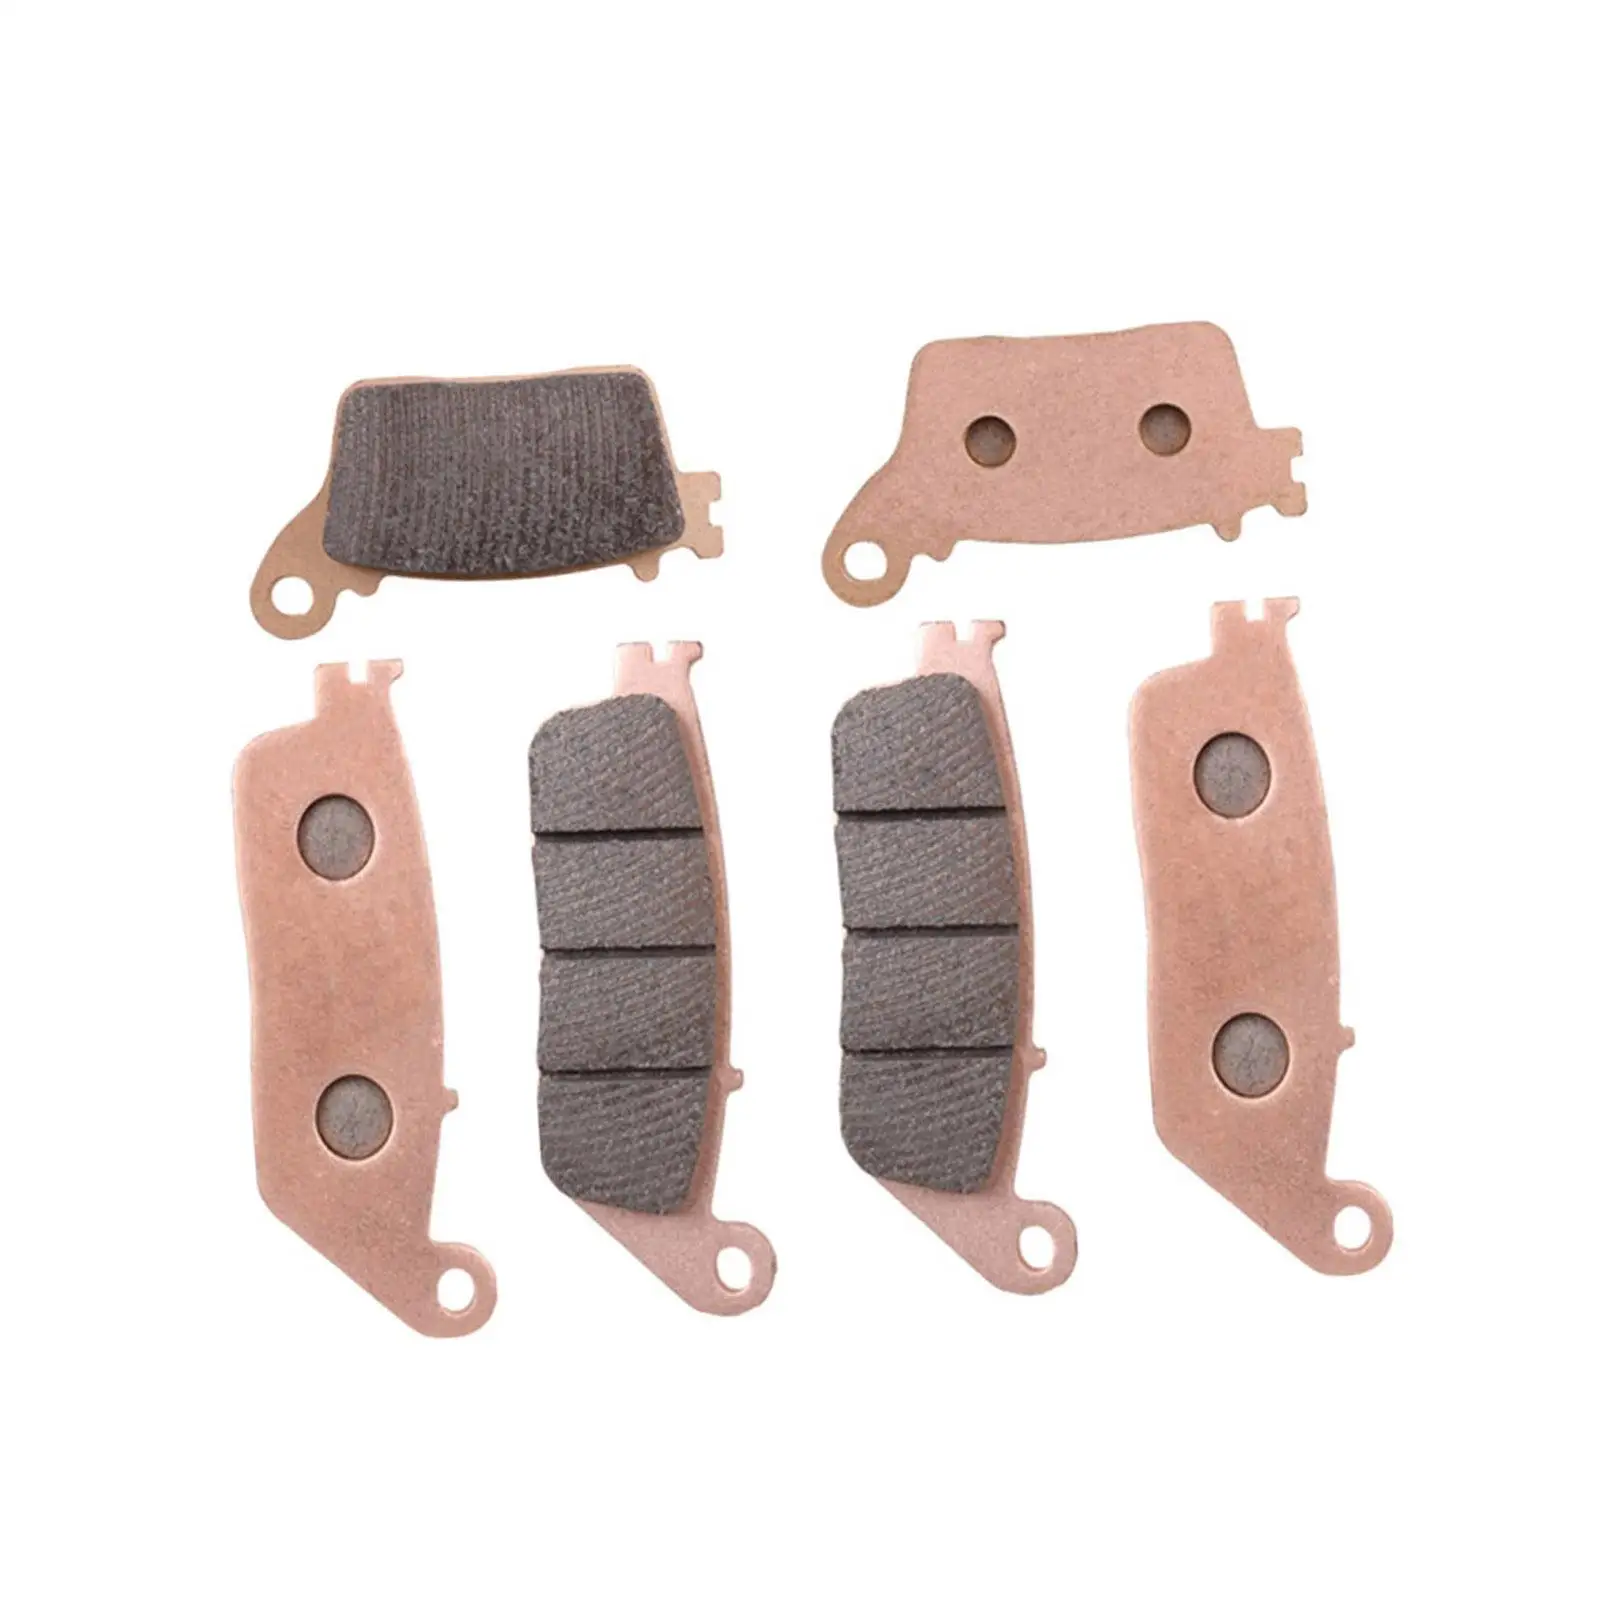 

6 Pieces Front Rear Brake Pads Set Motorcycle Replacement Part for Honda CB600 F7 F8 F9 Fa FB FC CBR600 FB FC Durable